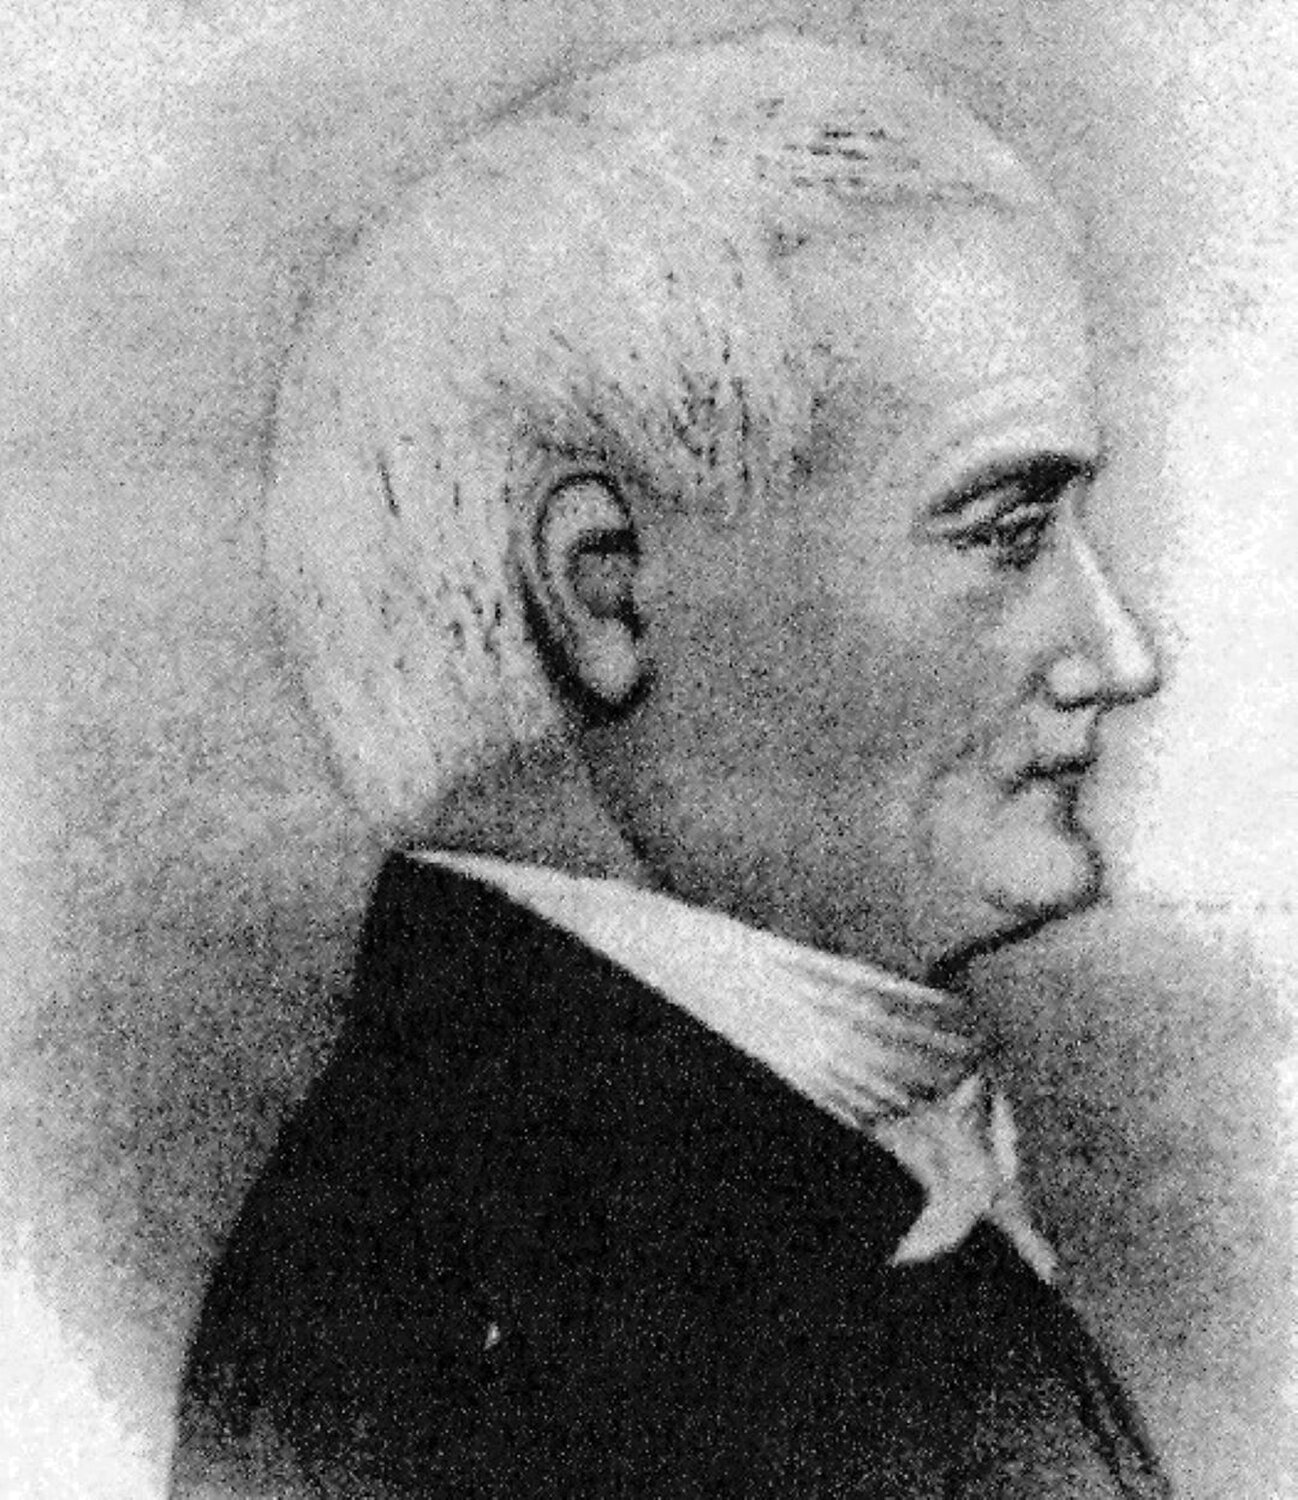 Benjamin Parry, shown here in about 1826, helped make New Hope the industrial and manufacturing capitol of Bucks County in the 19th century.